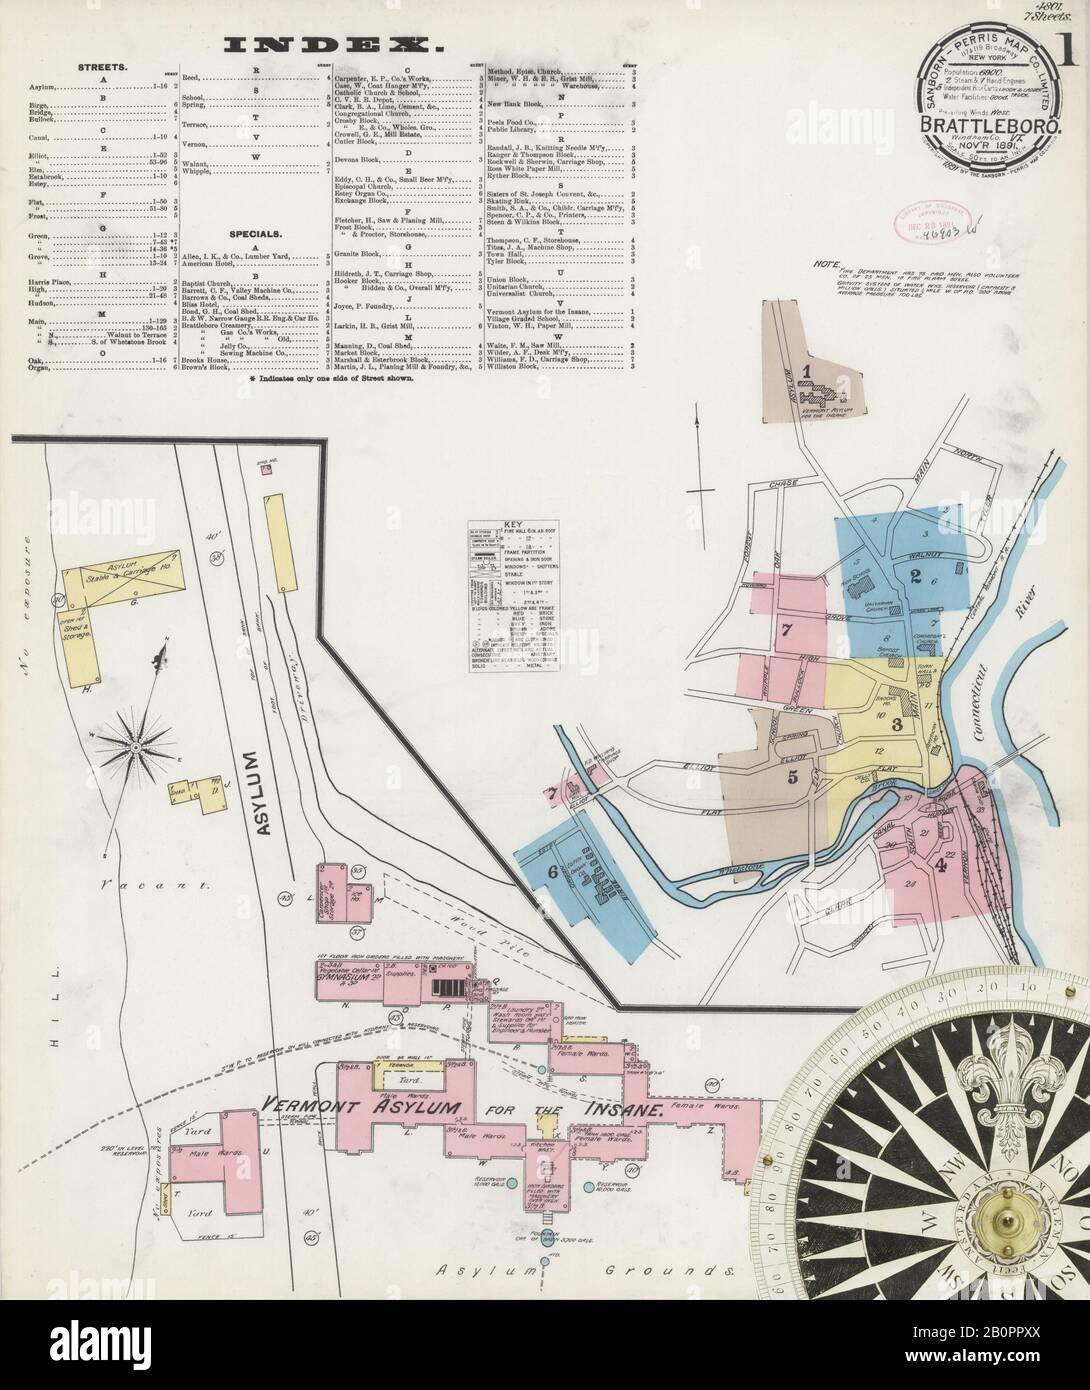 Image 1 of Sanborn Fire Insurance Map from Brattleboro, Windham County, Vermont. Nov 1891. 7 Sheet(s), America, street map with a Nineteenth Century compass Stock Photo